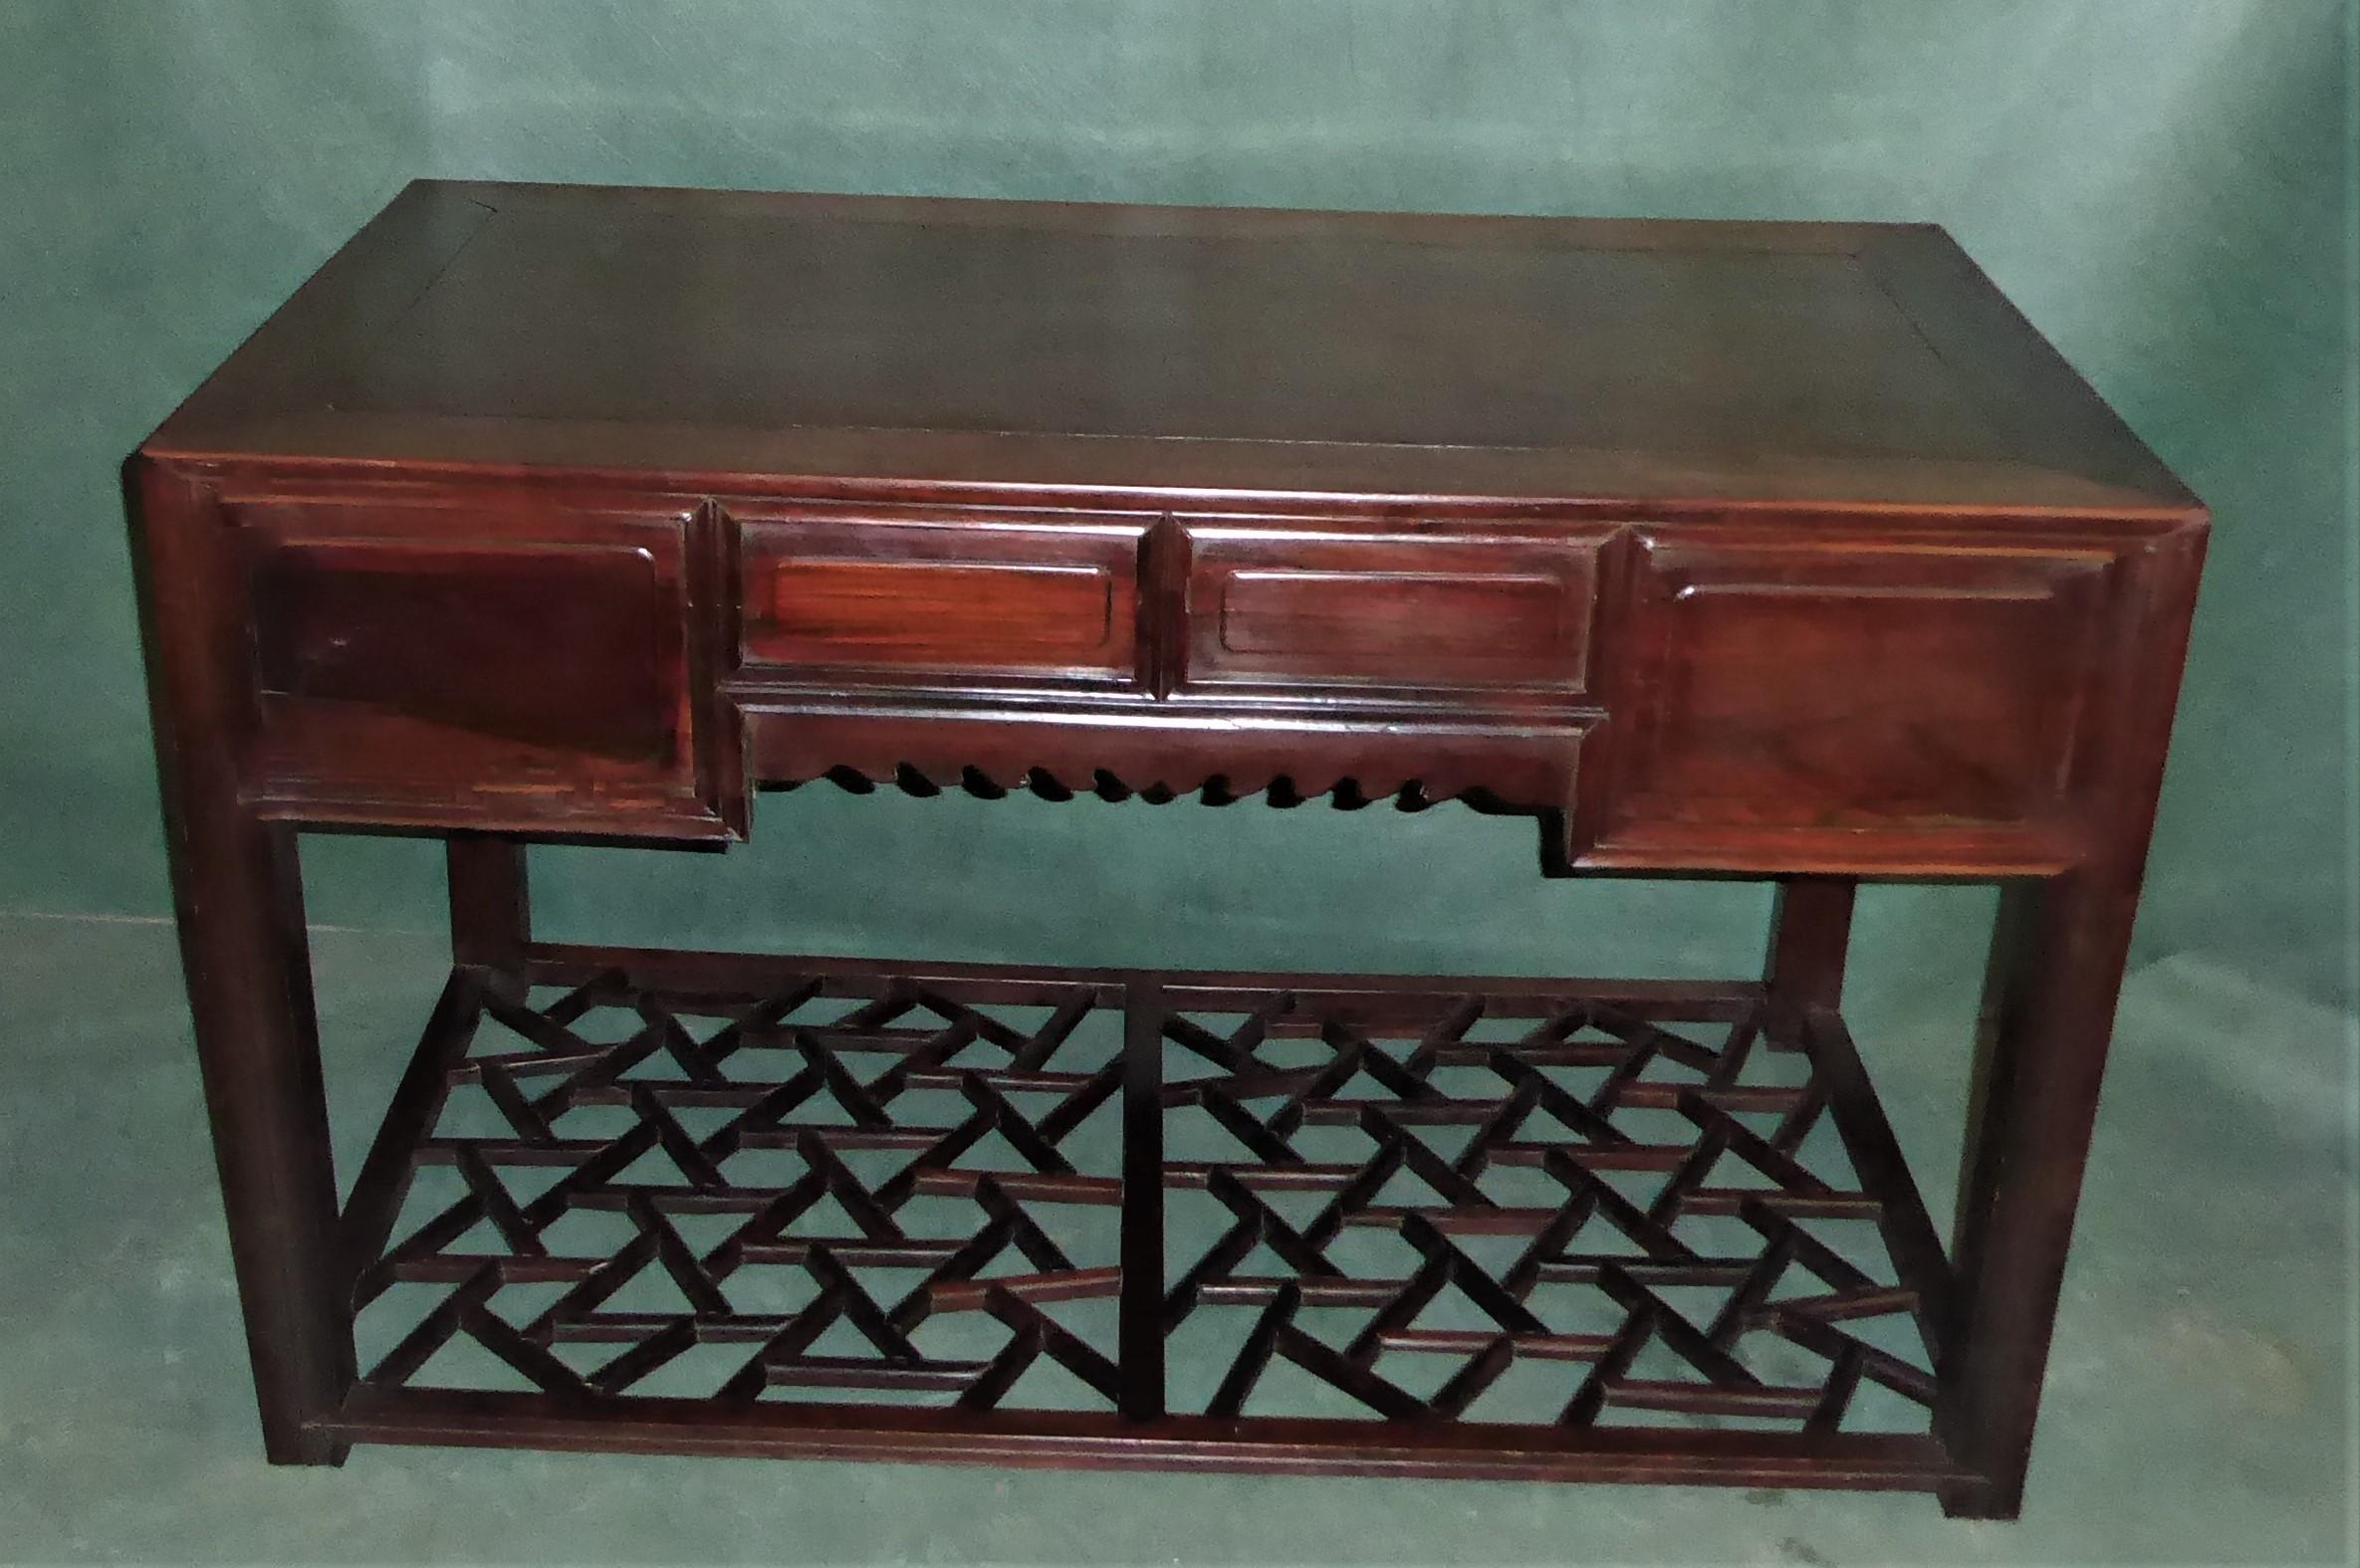 19th century Chinese centre table or desk with four drawers, panelled back and sides and fretwork base, a most attractive and interesting piece admired by all who view this piece being both useful and a delightful furnishing piece.
Highly